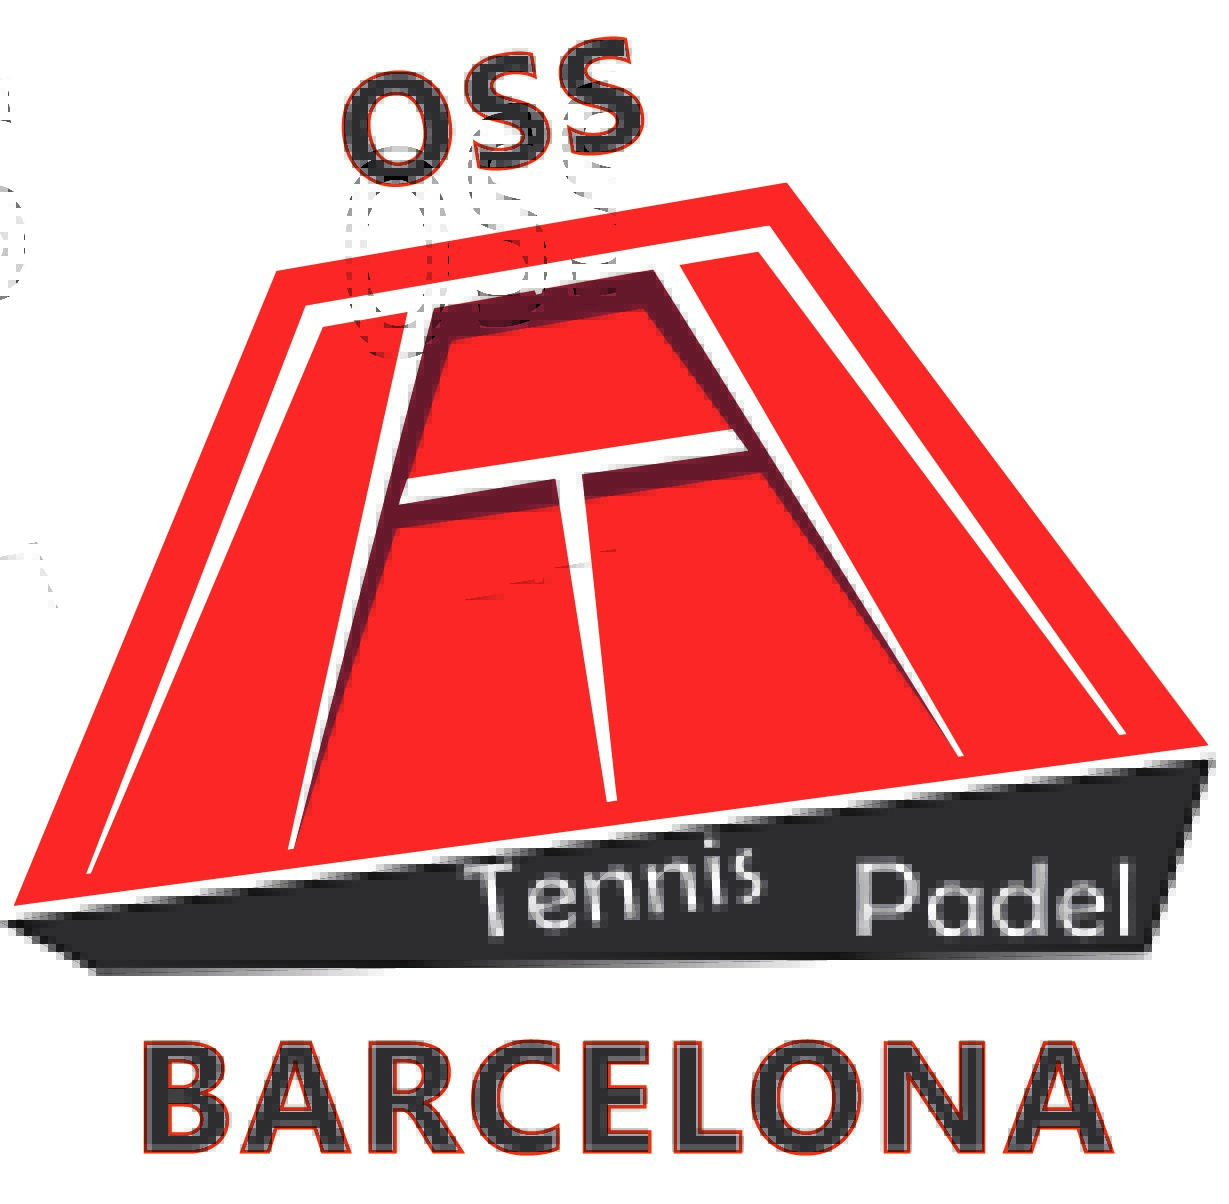 A career as a teacher padel, it interests you ?